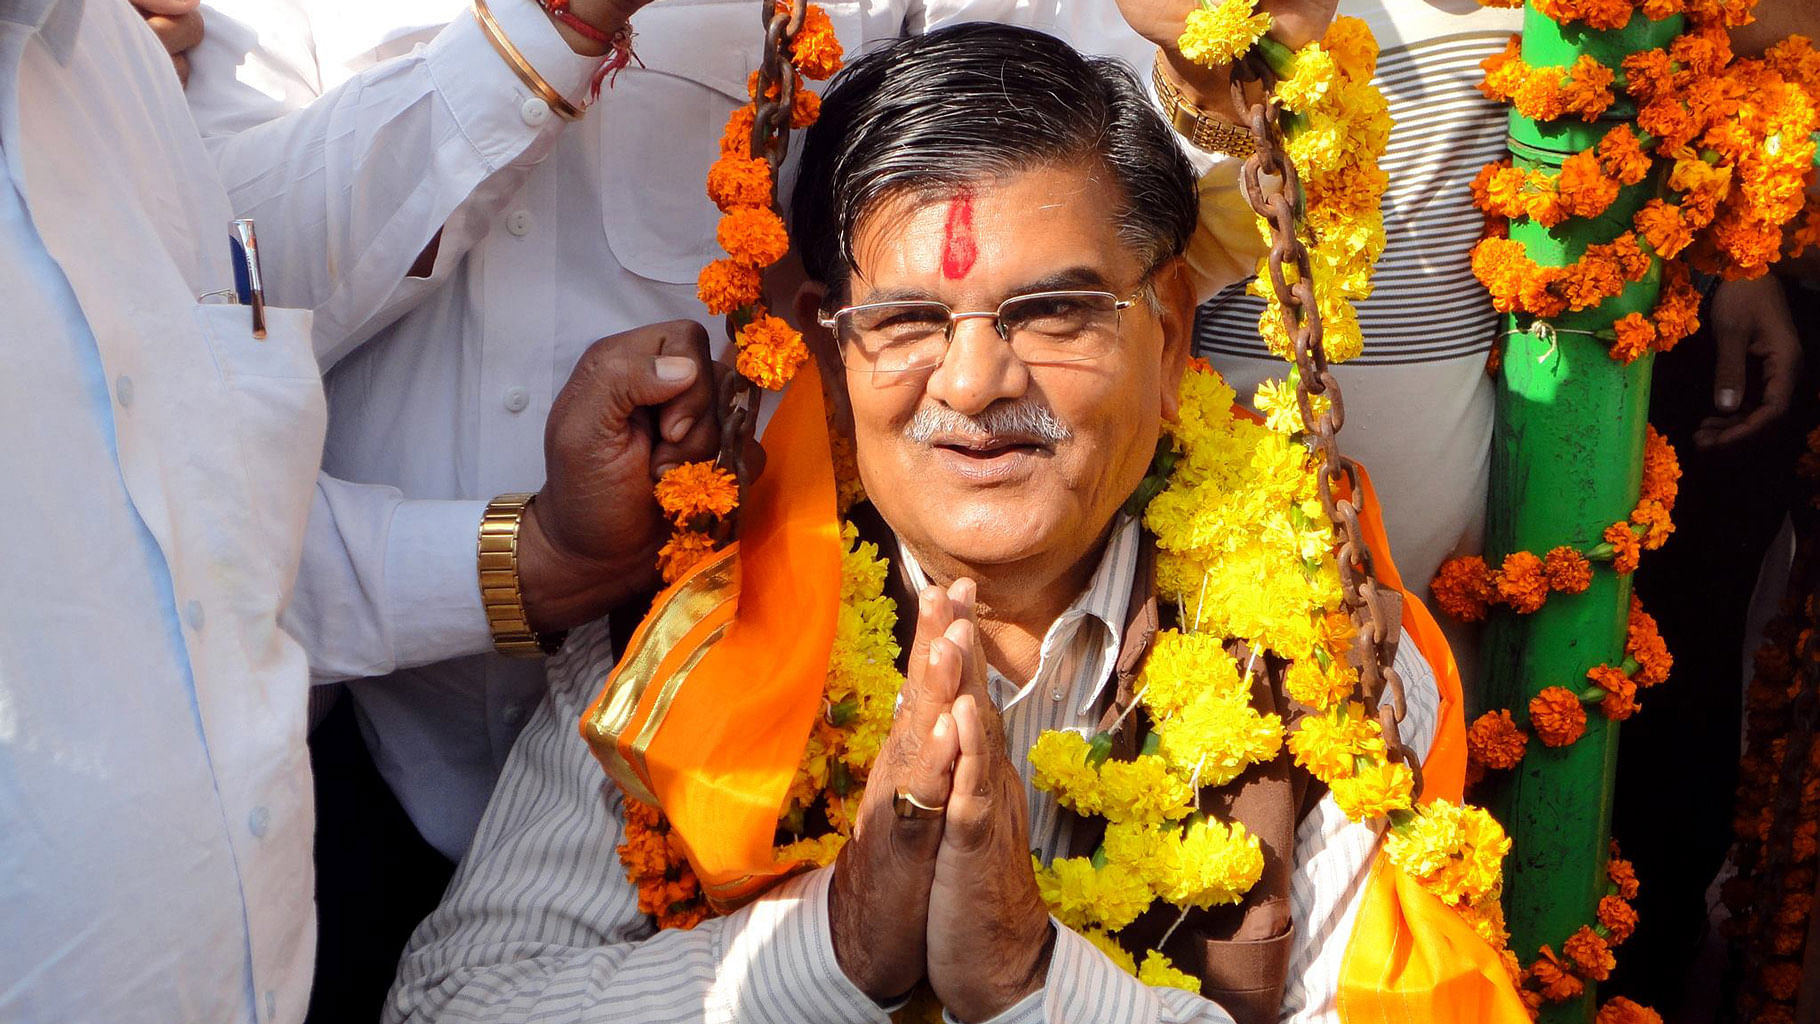 Rajasthan Home Minister, Gulab Chand Kataria. (Photo Courtesy: <a href="https://www.facebook.com/photo.php?fbid=1384525888457775&amp;set=a.1382878118622552.1073741825.100007011310294&amp;type=3&amp;theater">Facebook/ Gulab Chand Kataria</a>)